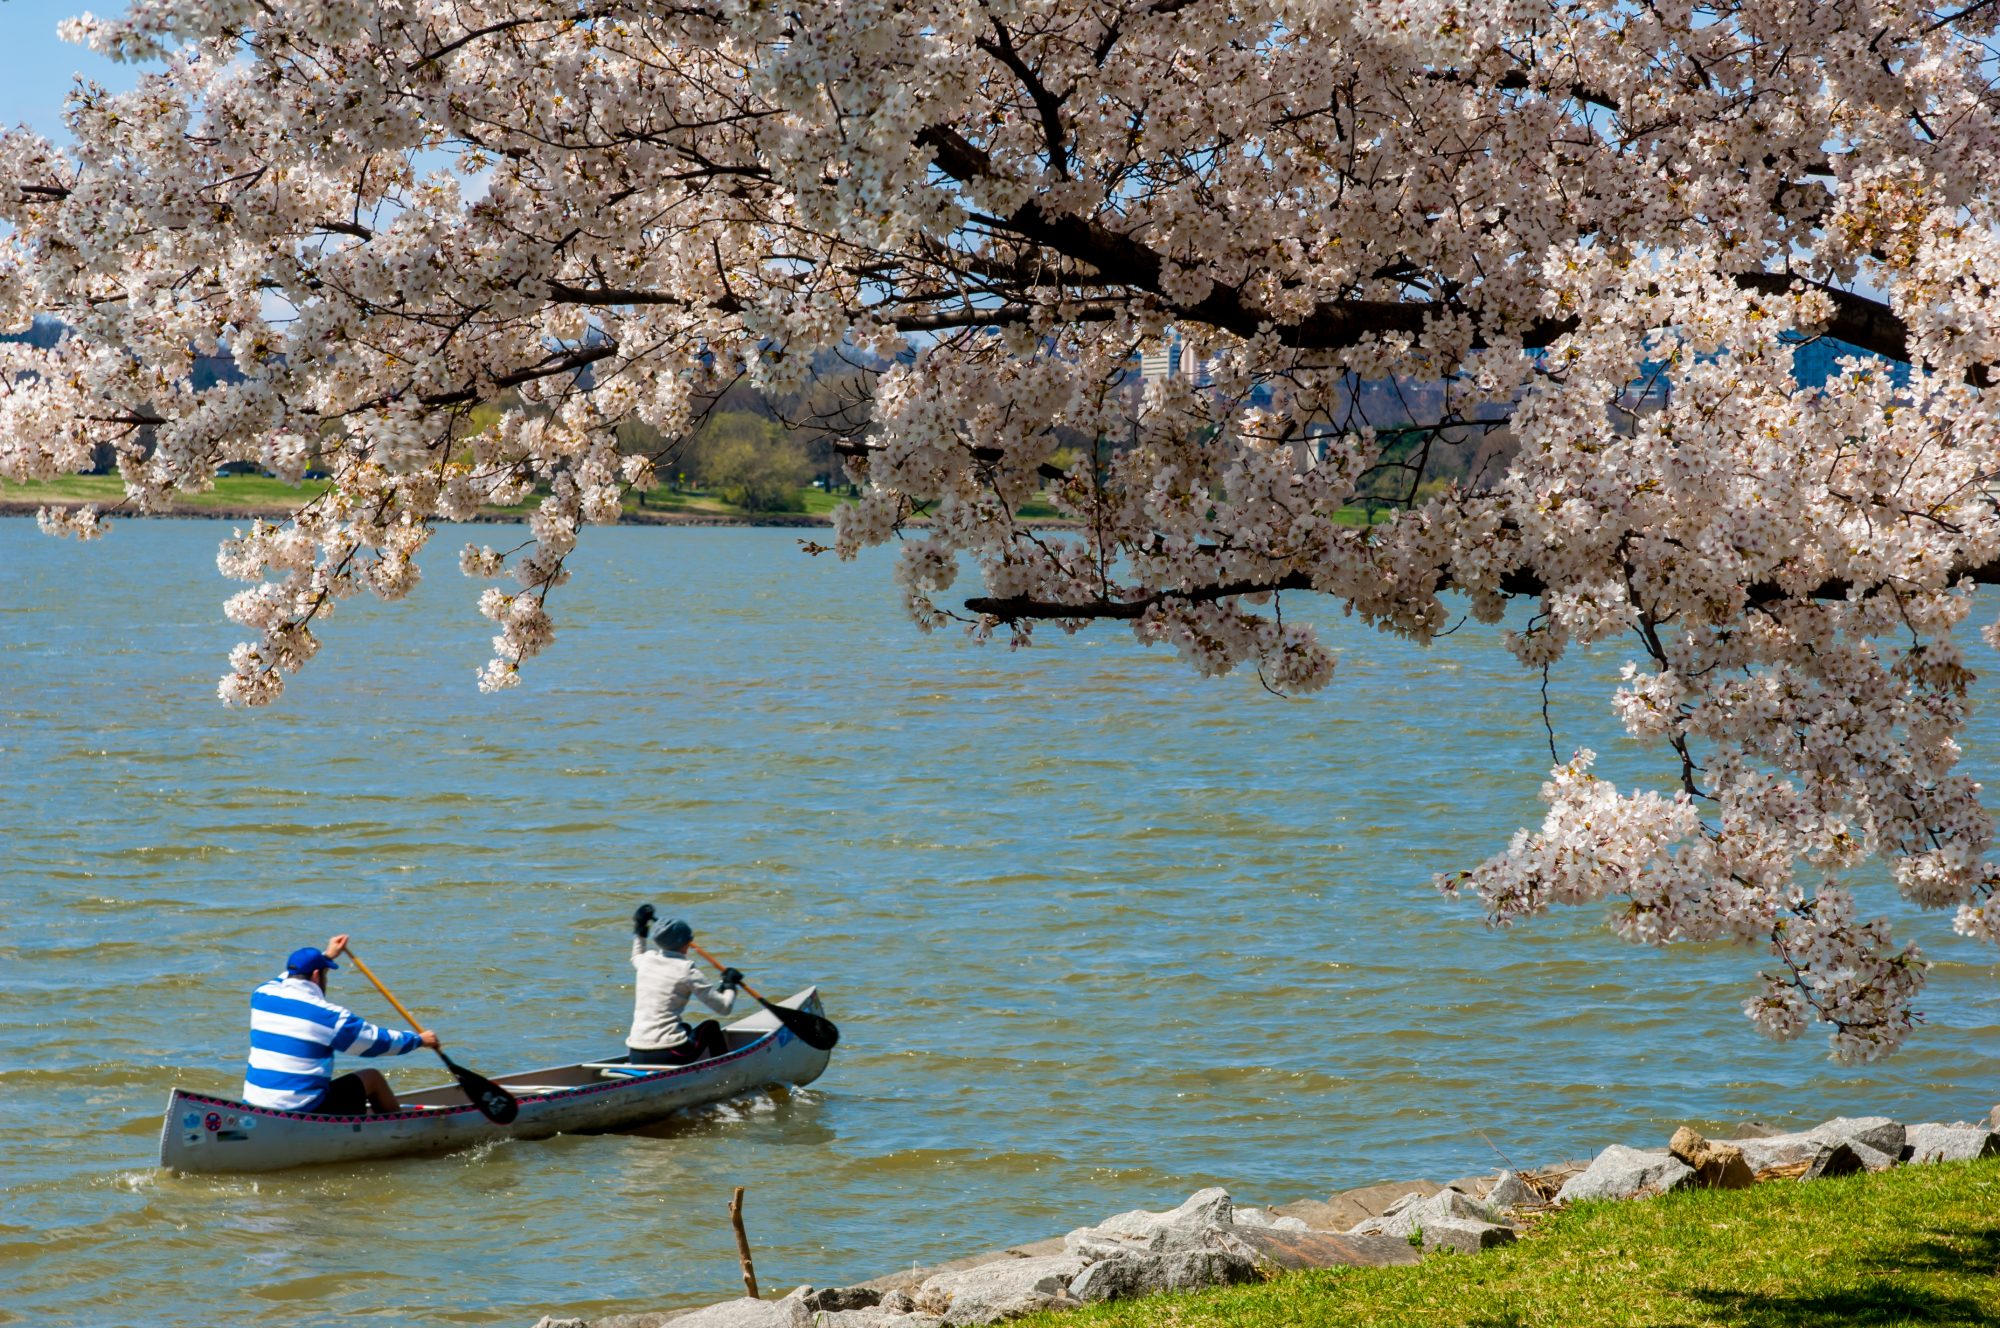 Two people rowing a canoe in the Potomac River. A tree full of cherry blossoms is along the shore.